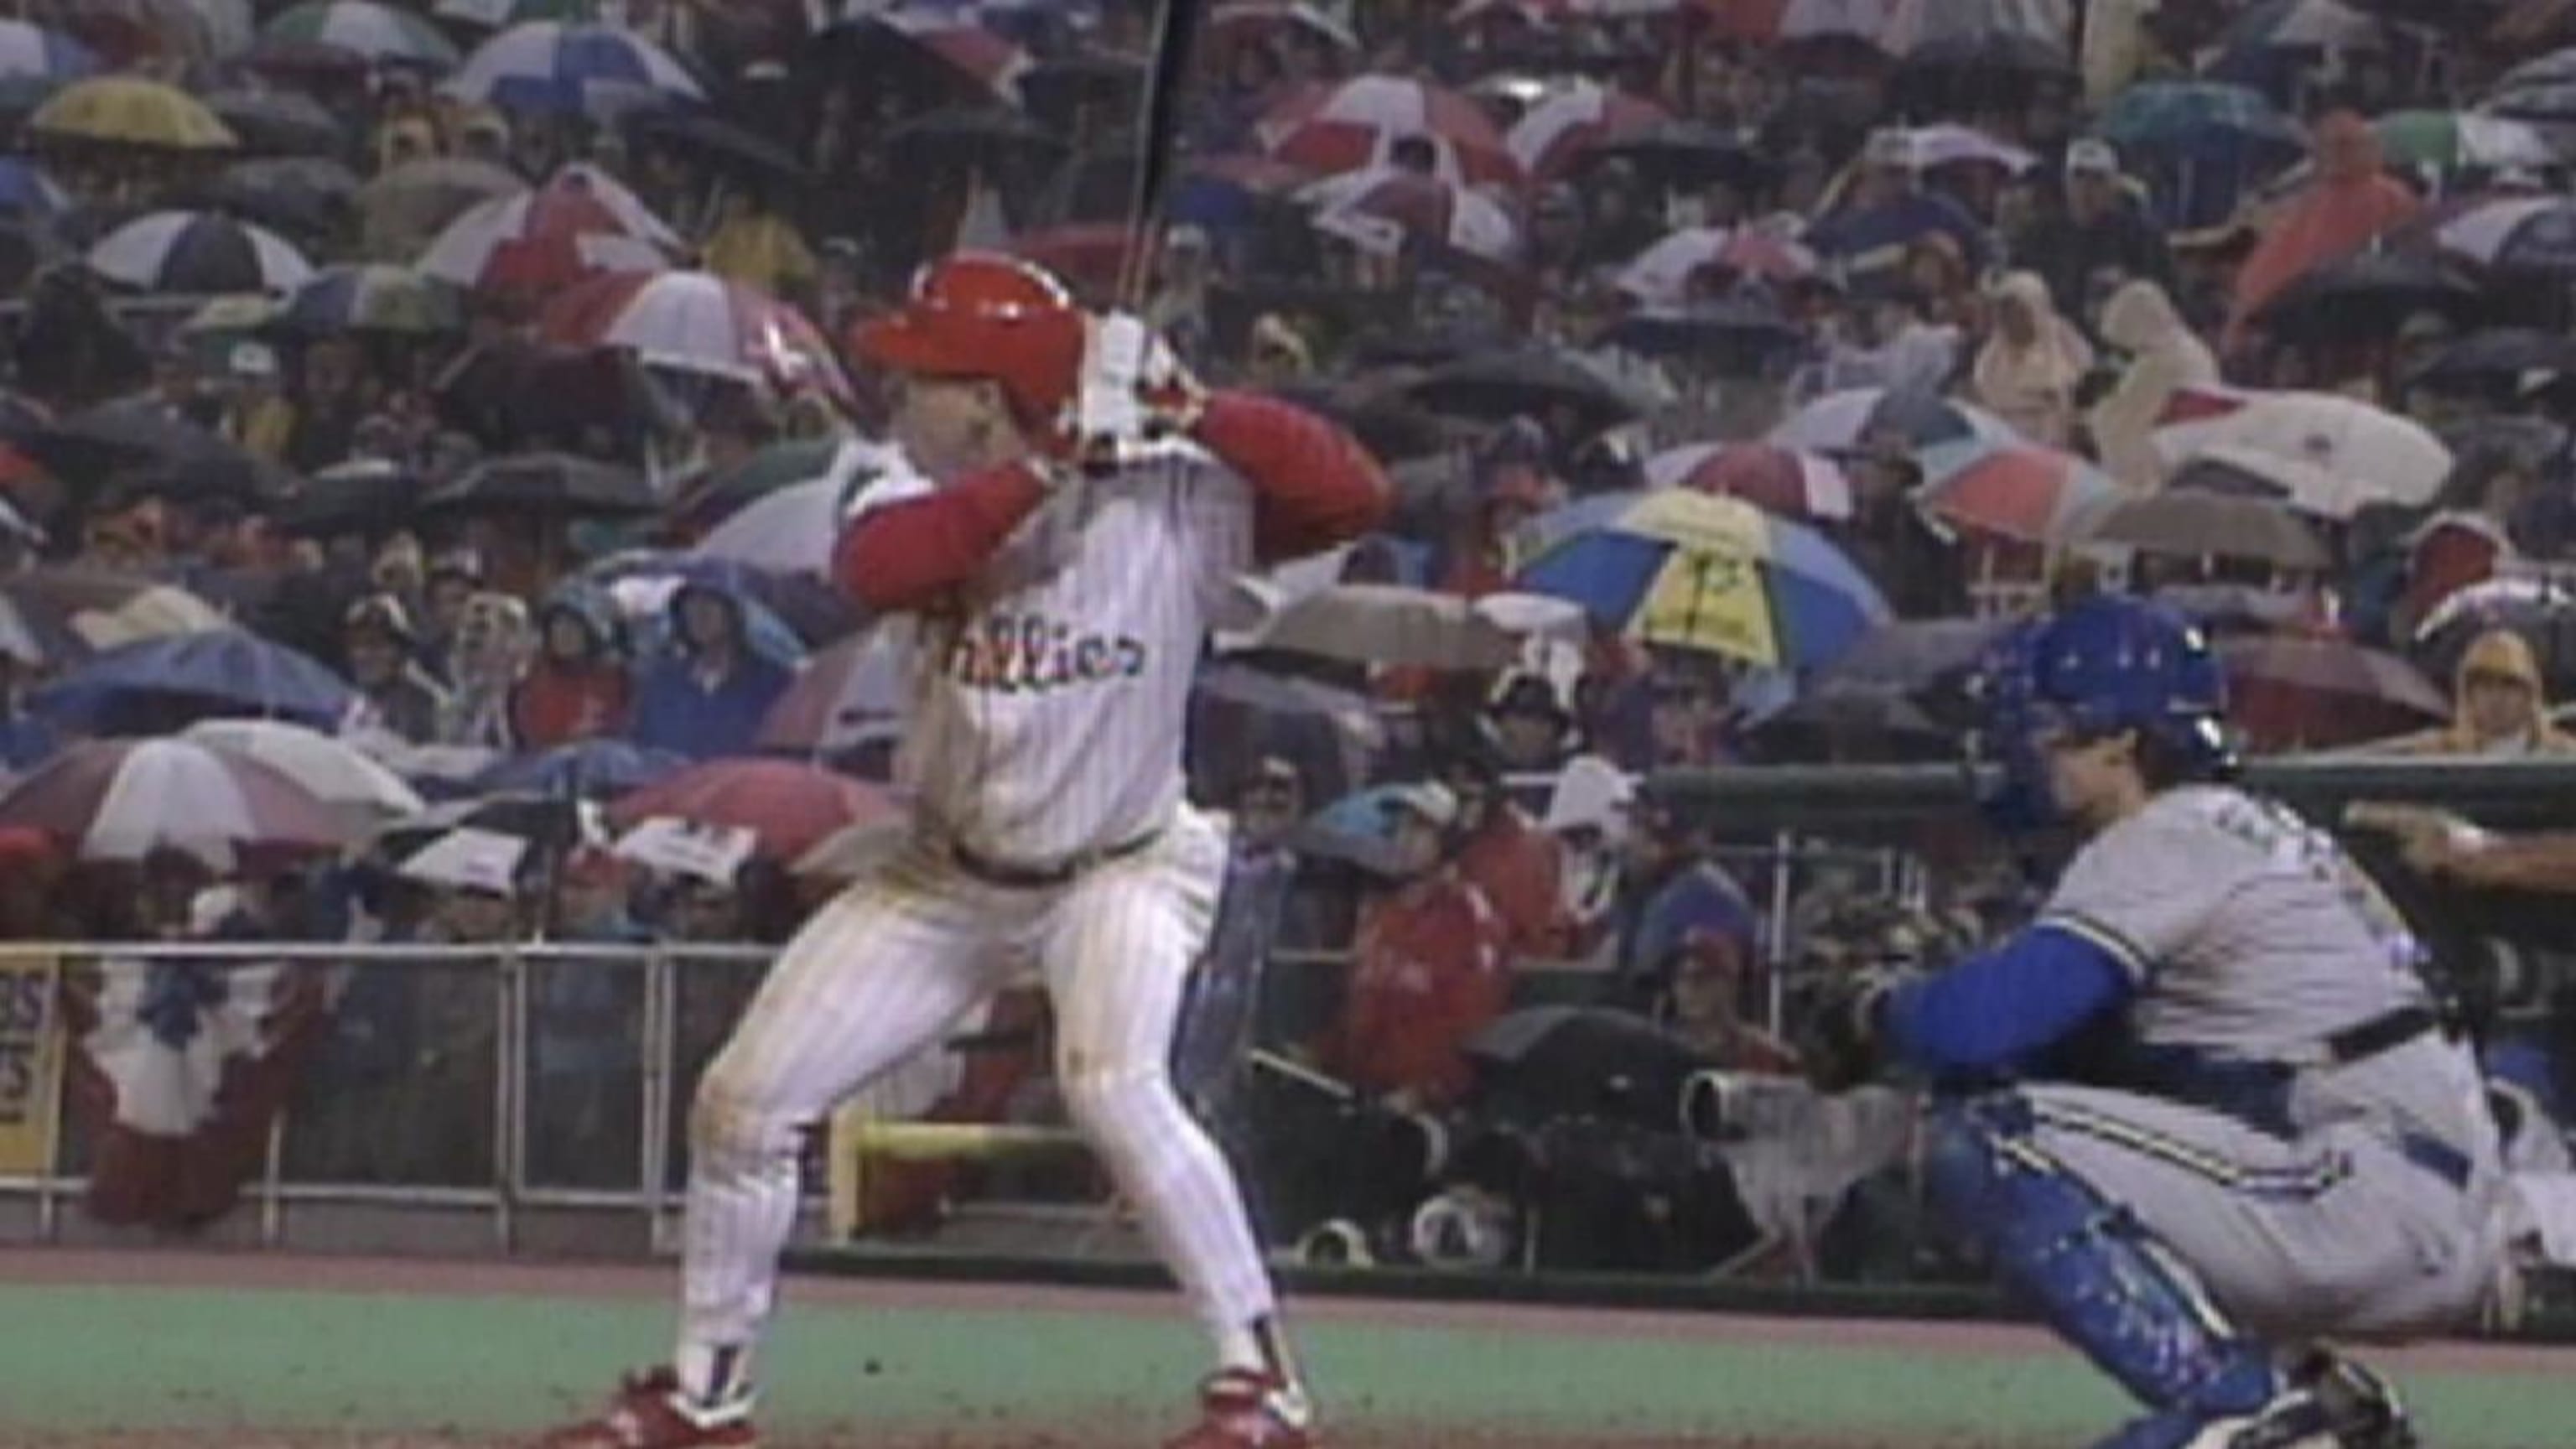 Phillies uniform numbers, 0 to 99.